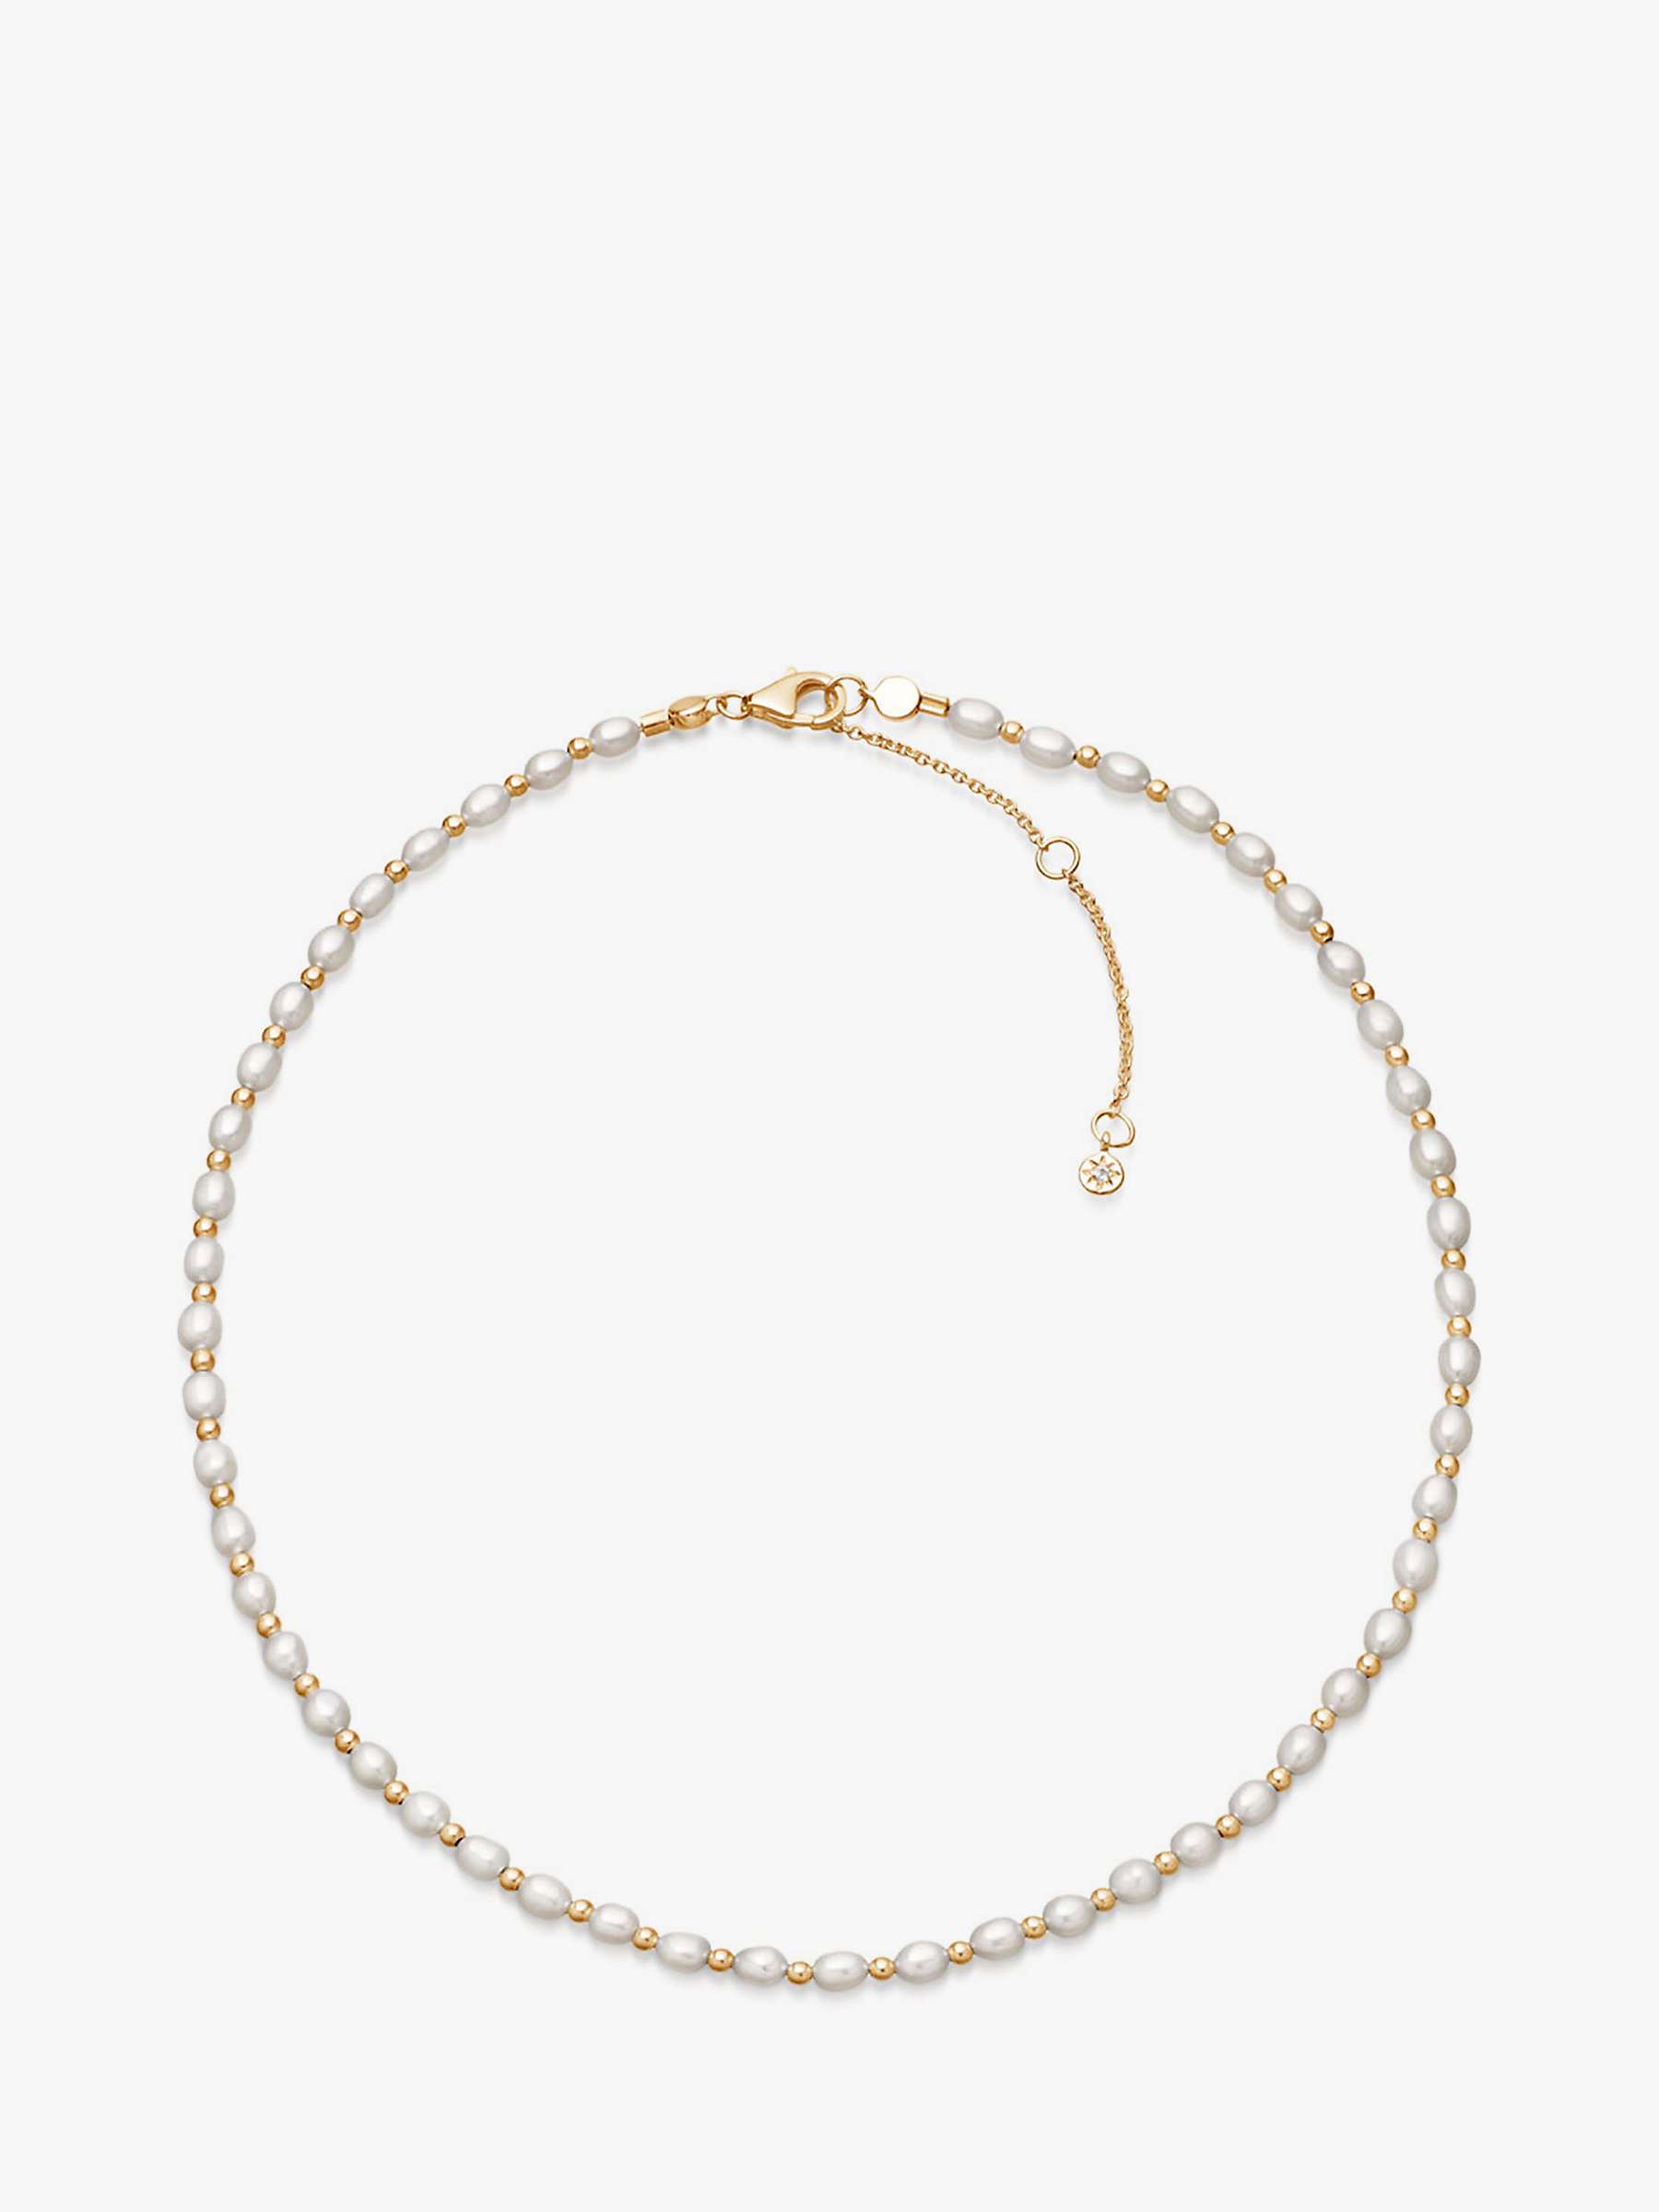 Buy Astley Clarke Stilla Pearl and Bead Choker Necklace, Gold/White Online at johnlewis.com